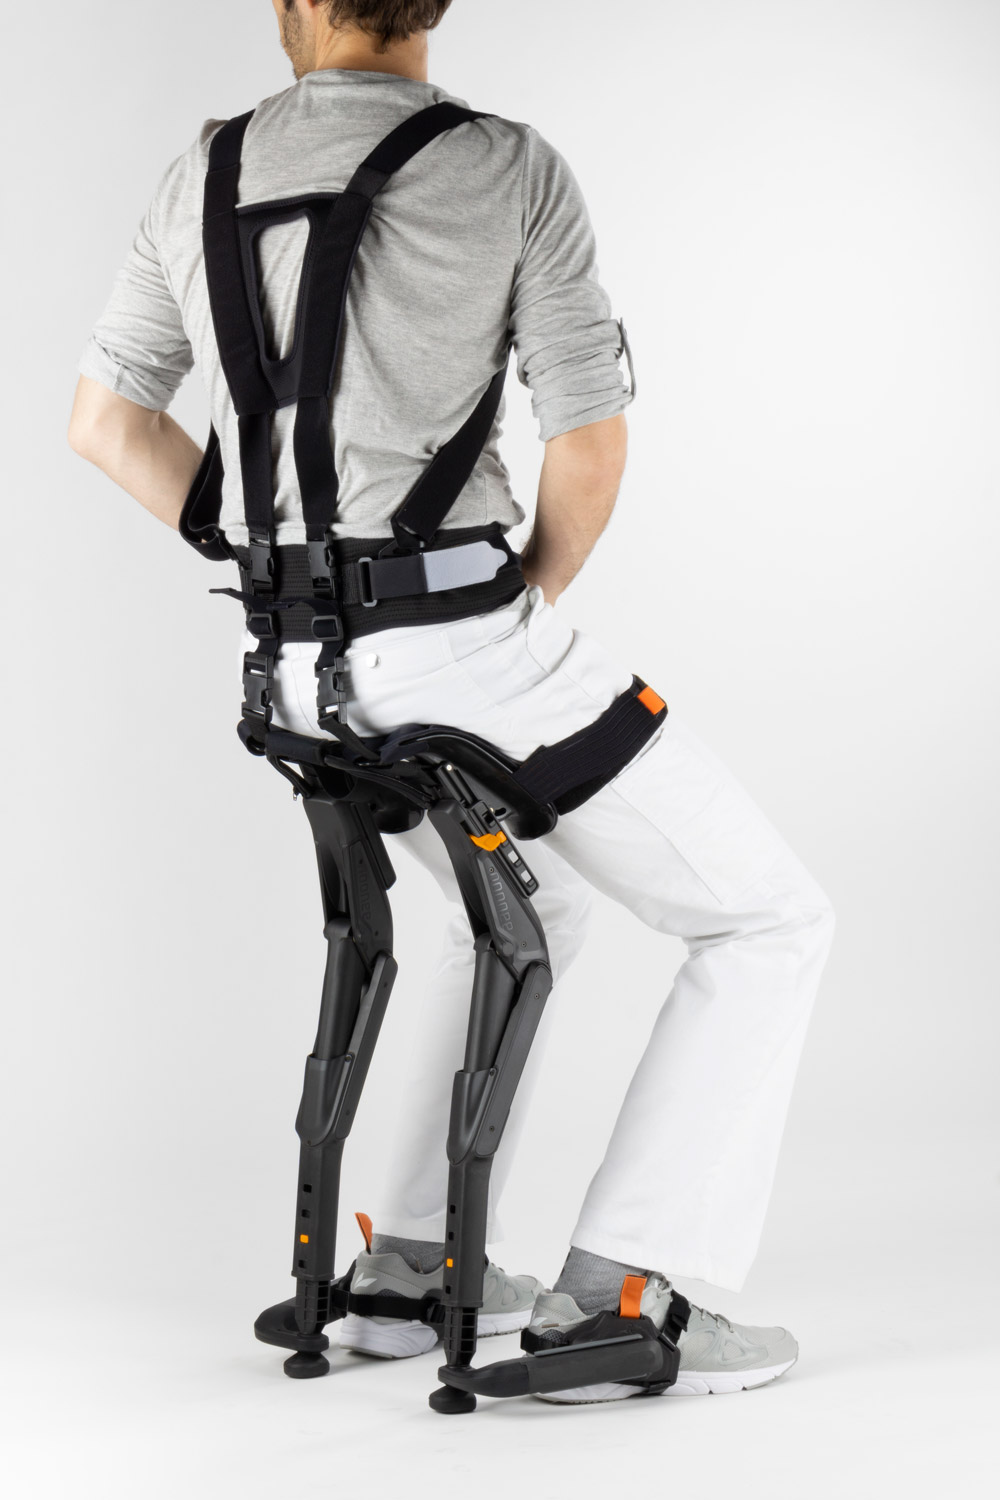 The Chairless Chair Increases Productivity And Decreases Physical Strains